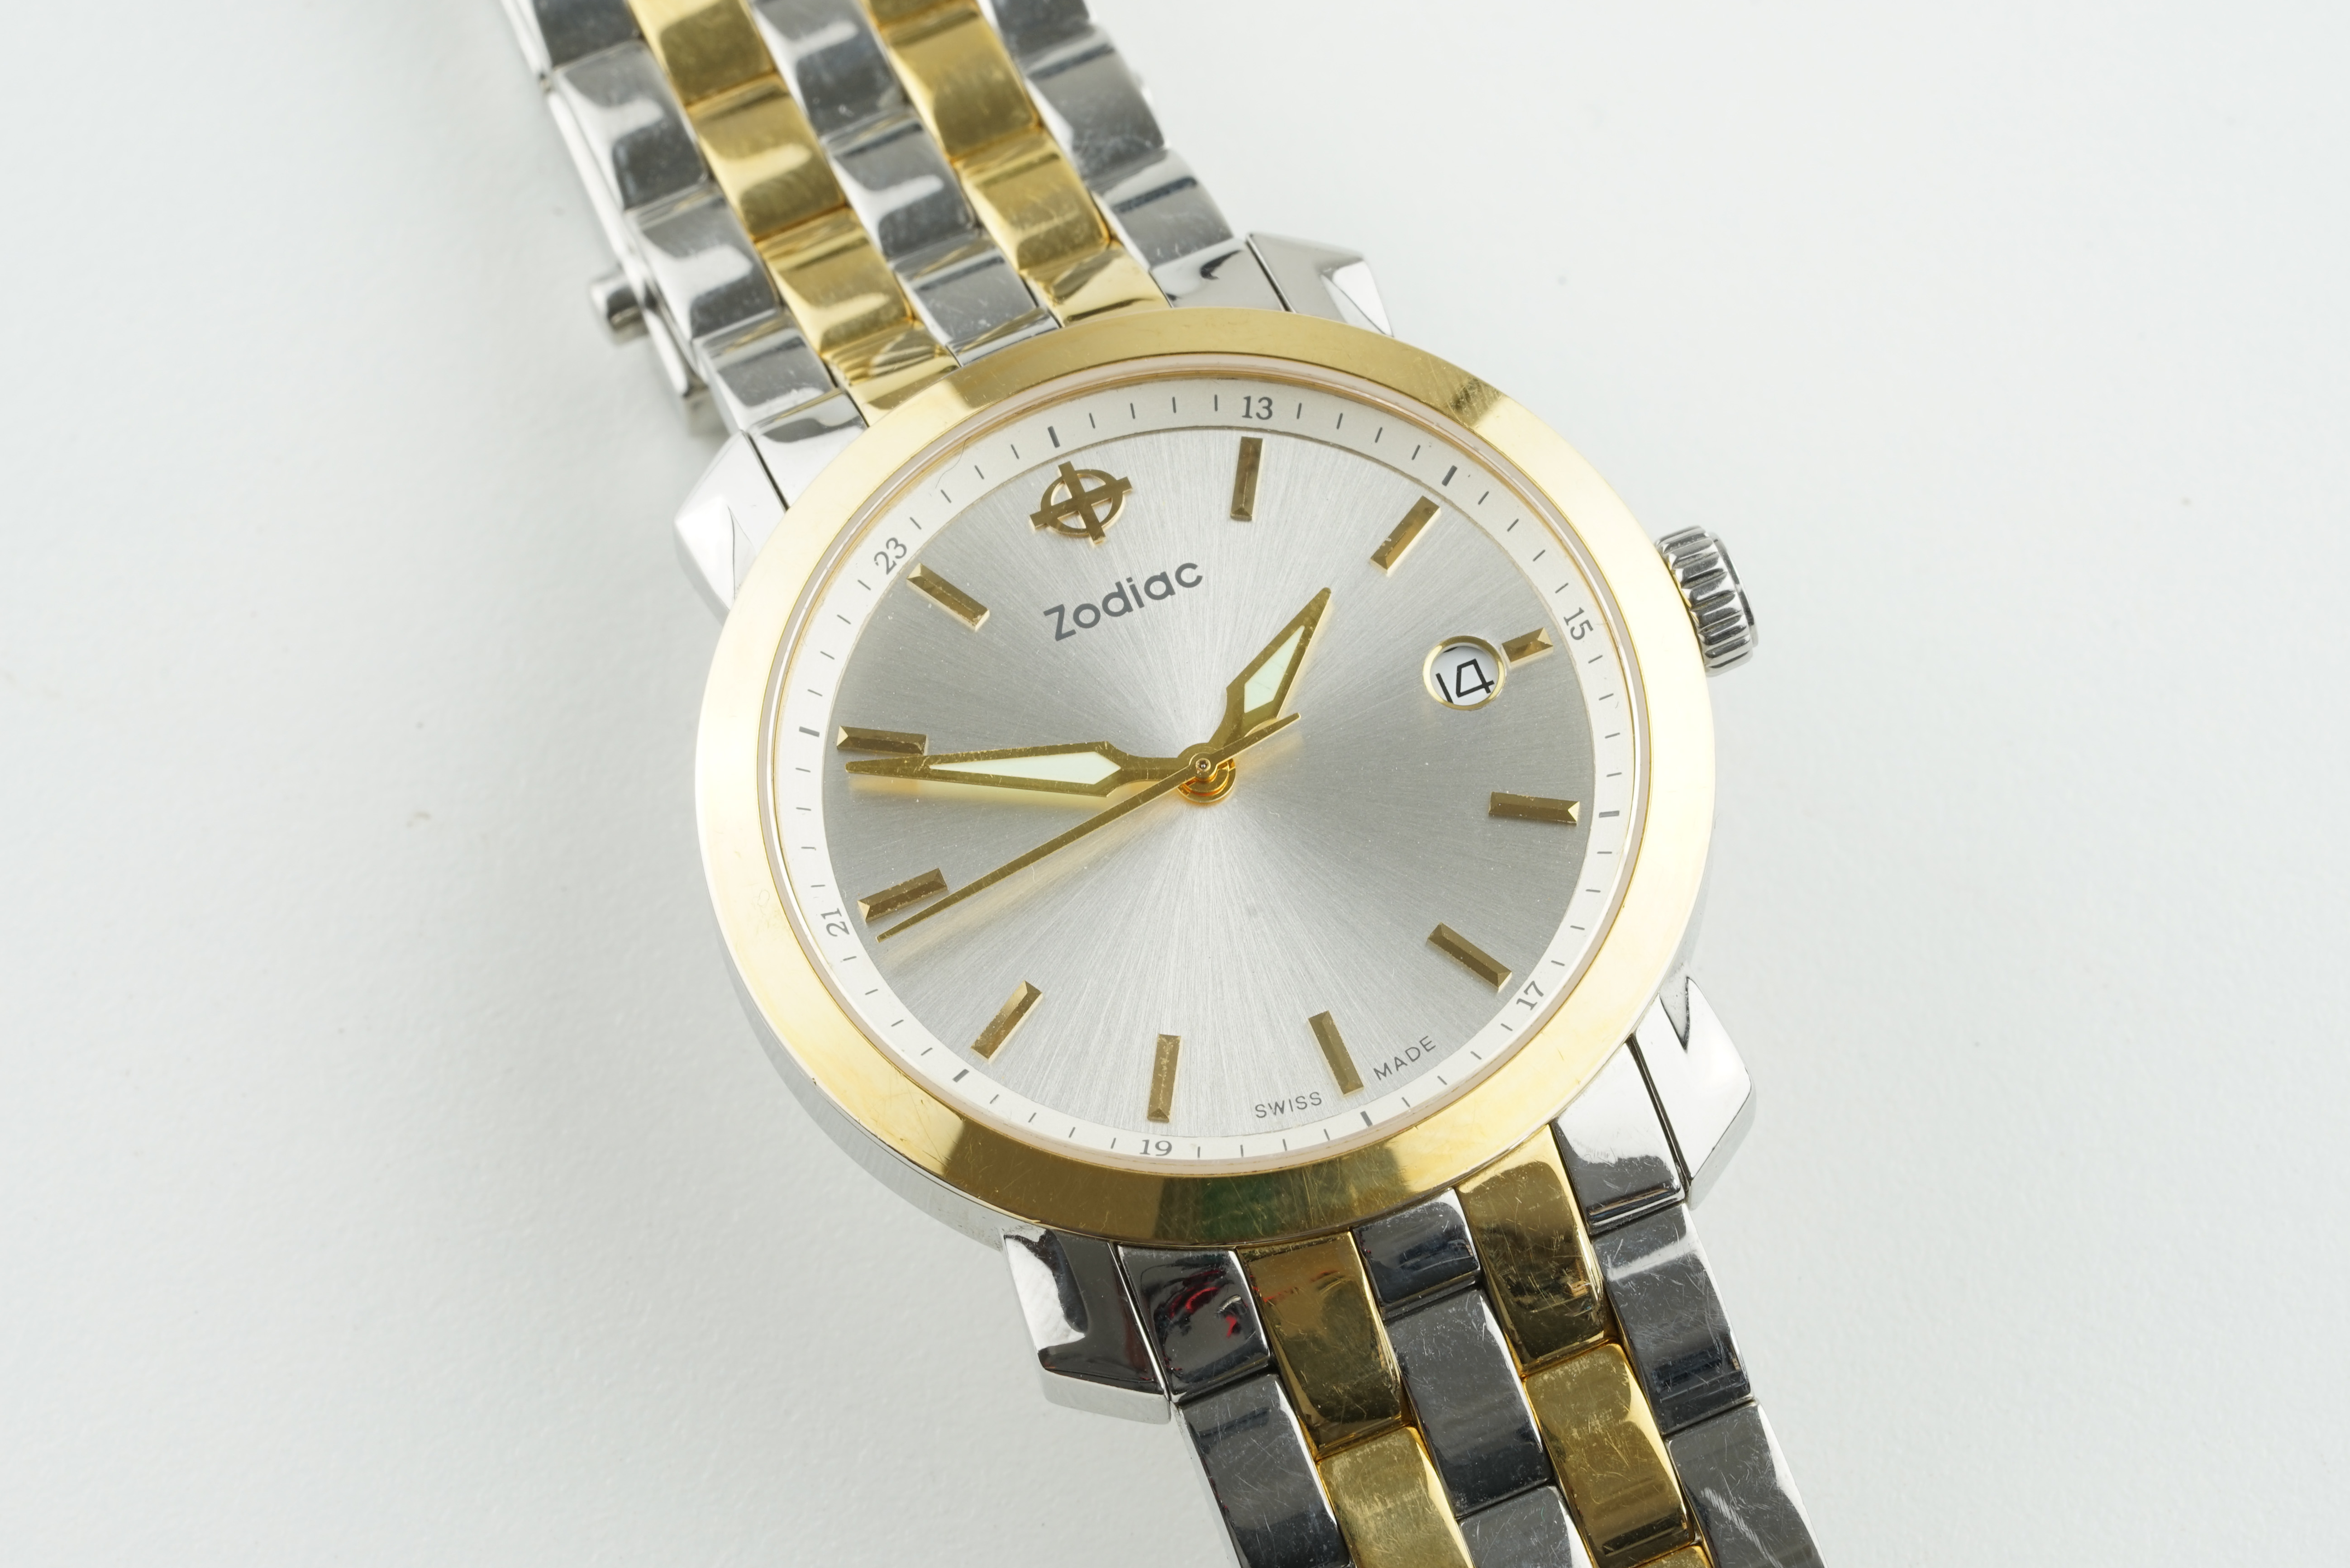 ZODIAC BI METAL DATE WRISTWATCH Z01003,circular silver dial with gold applied hour markers and